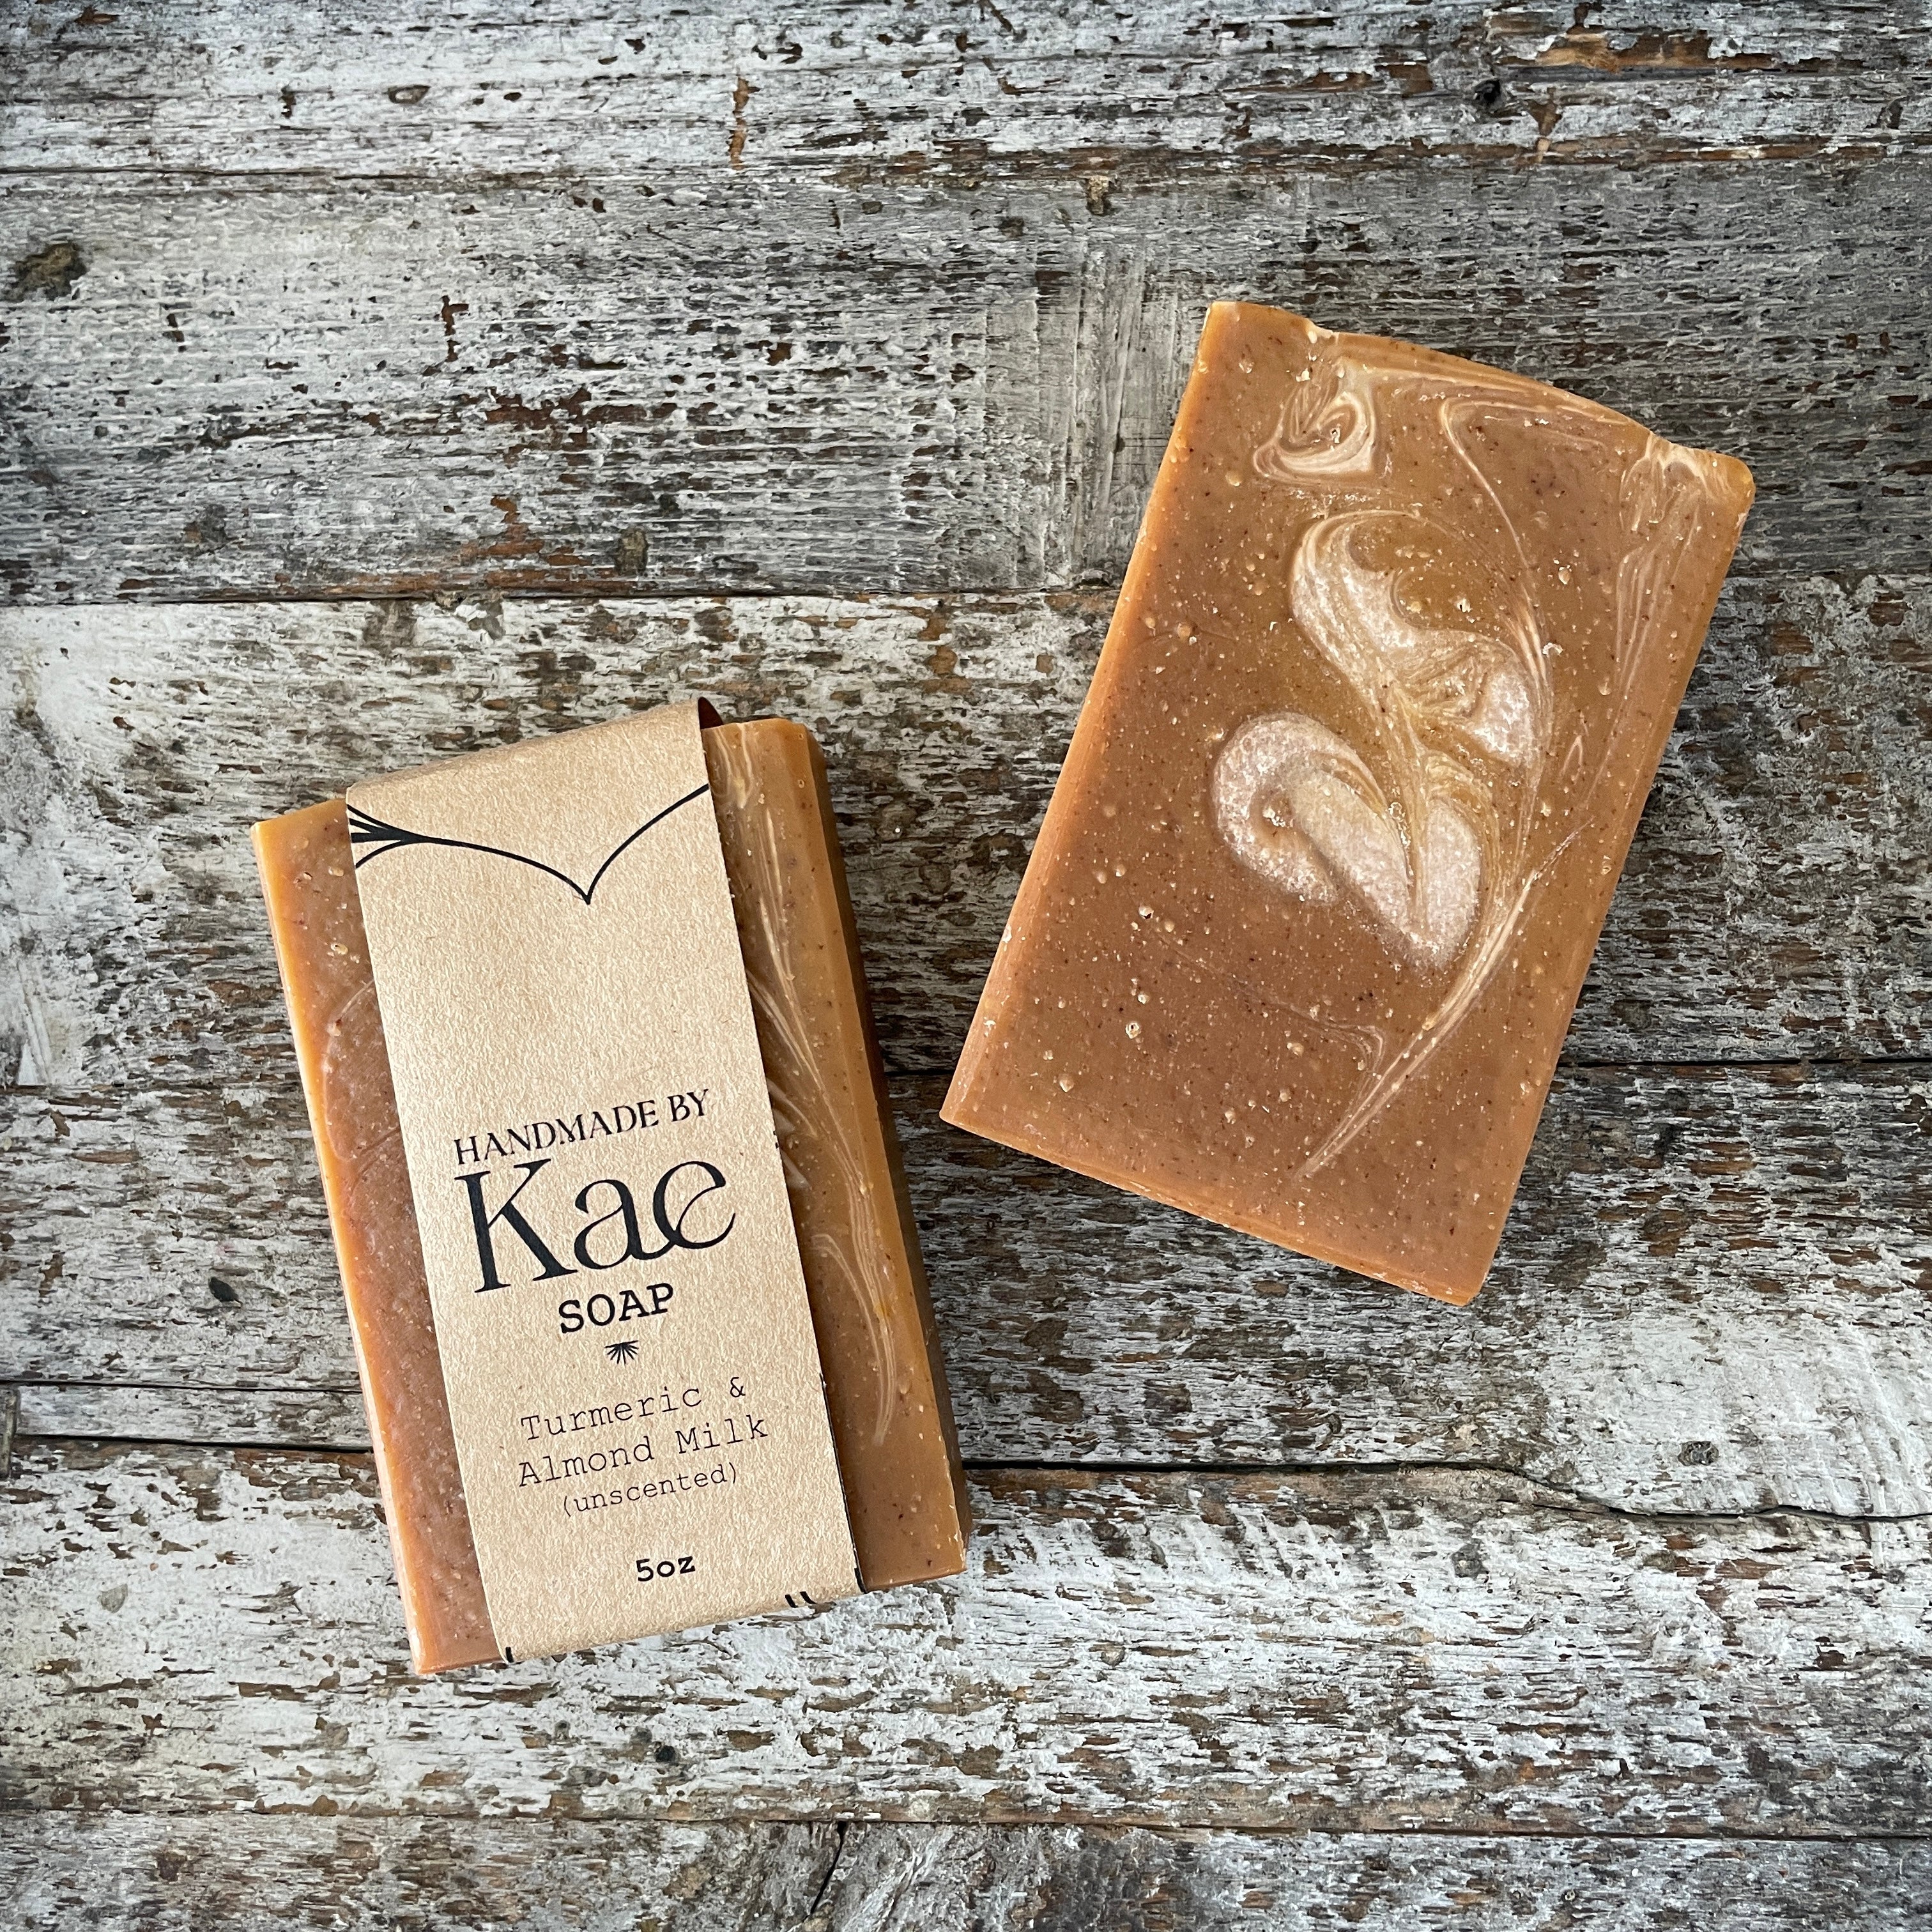 Turmeric and Almond Milk Soap (unscented)